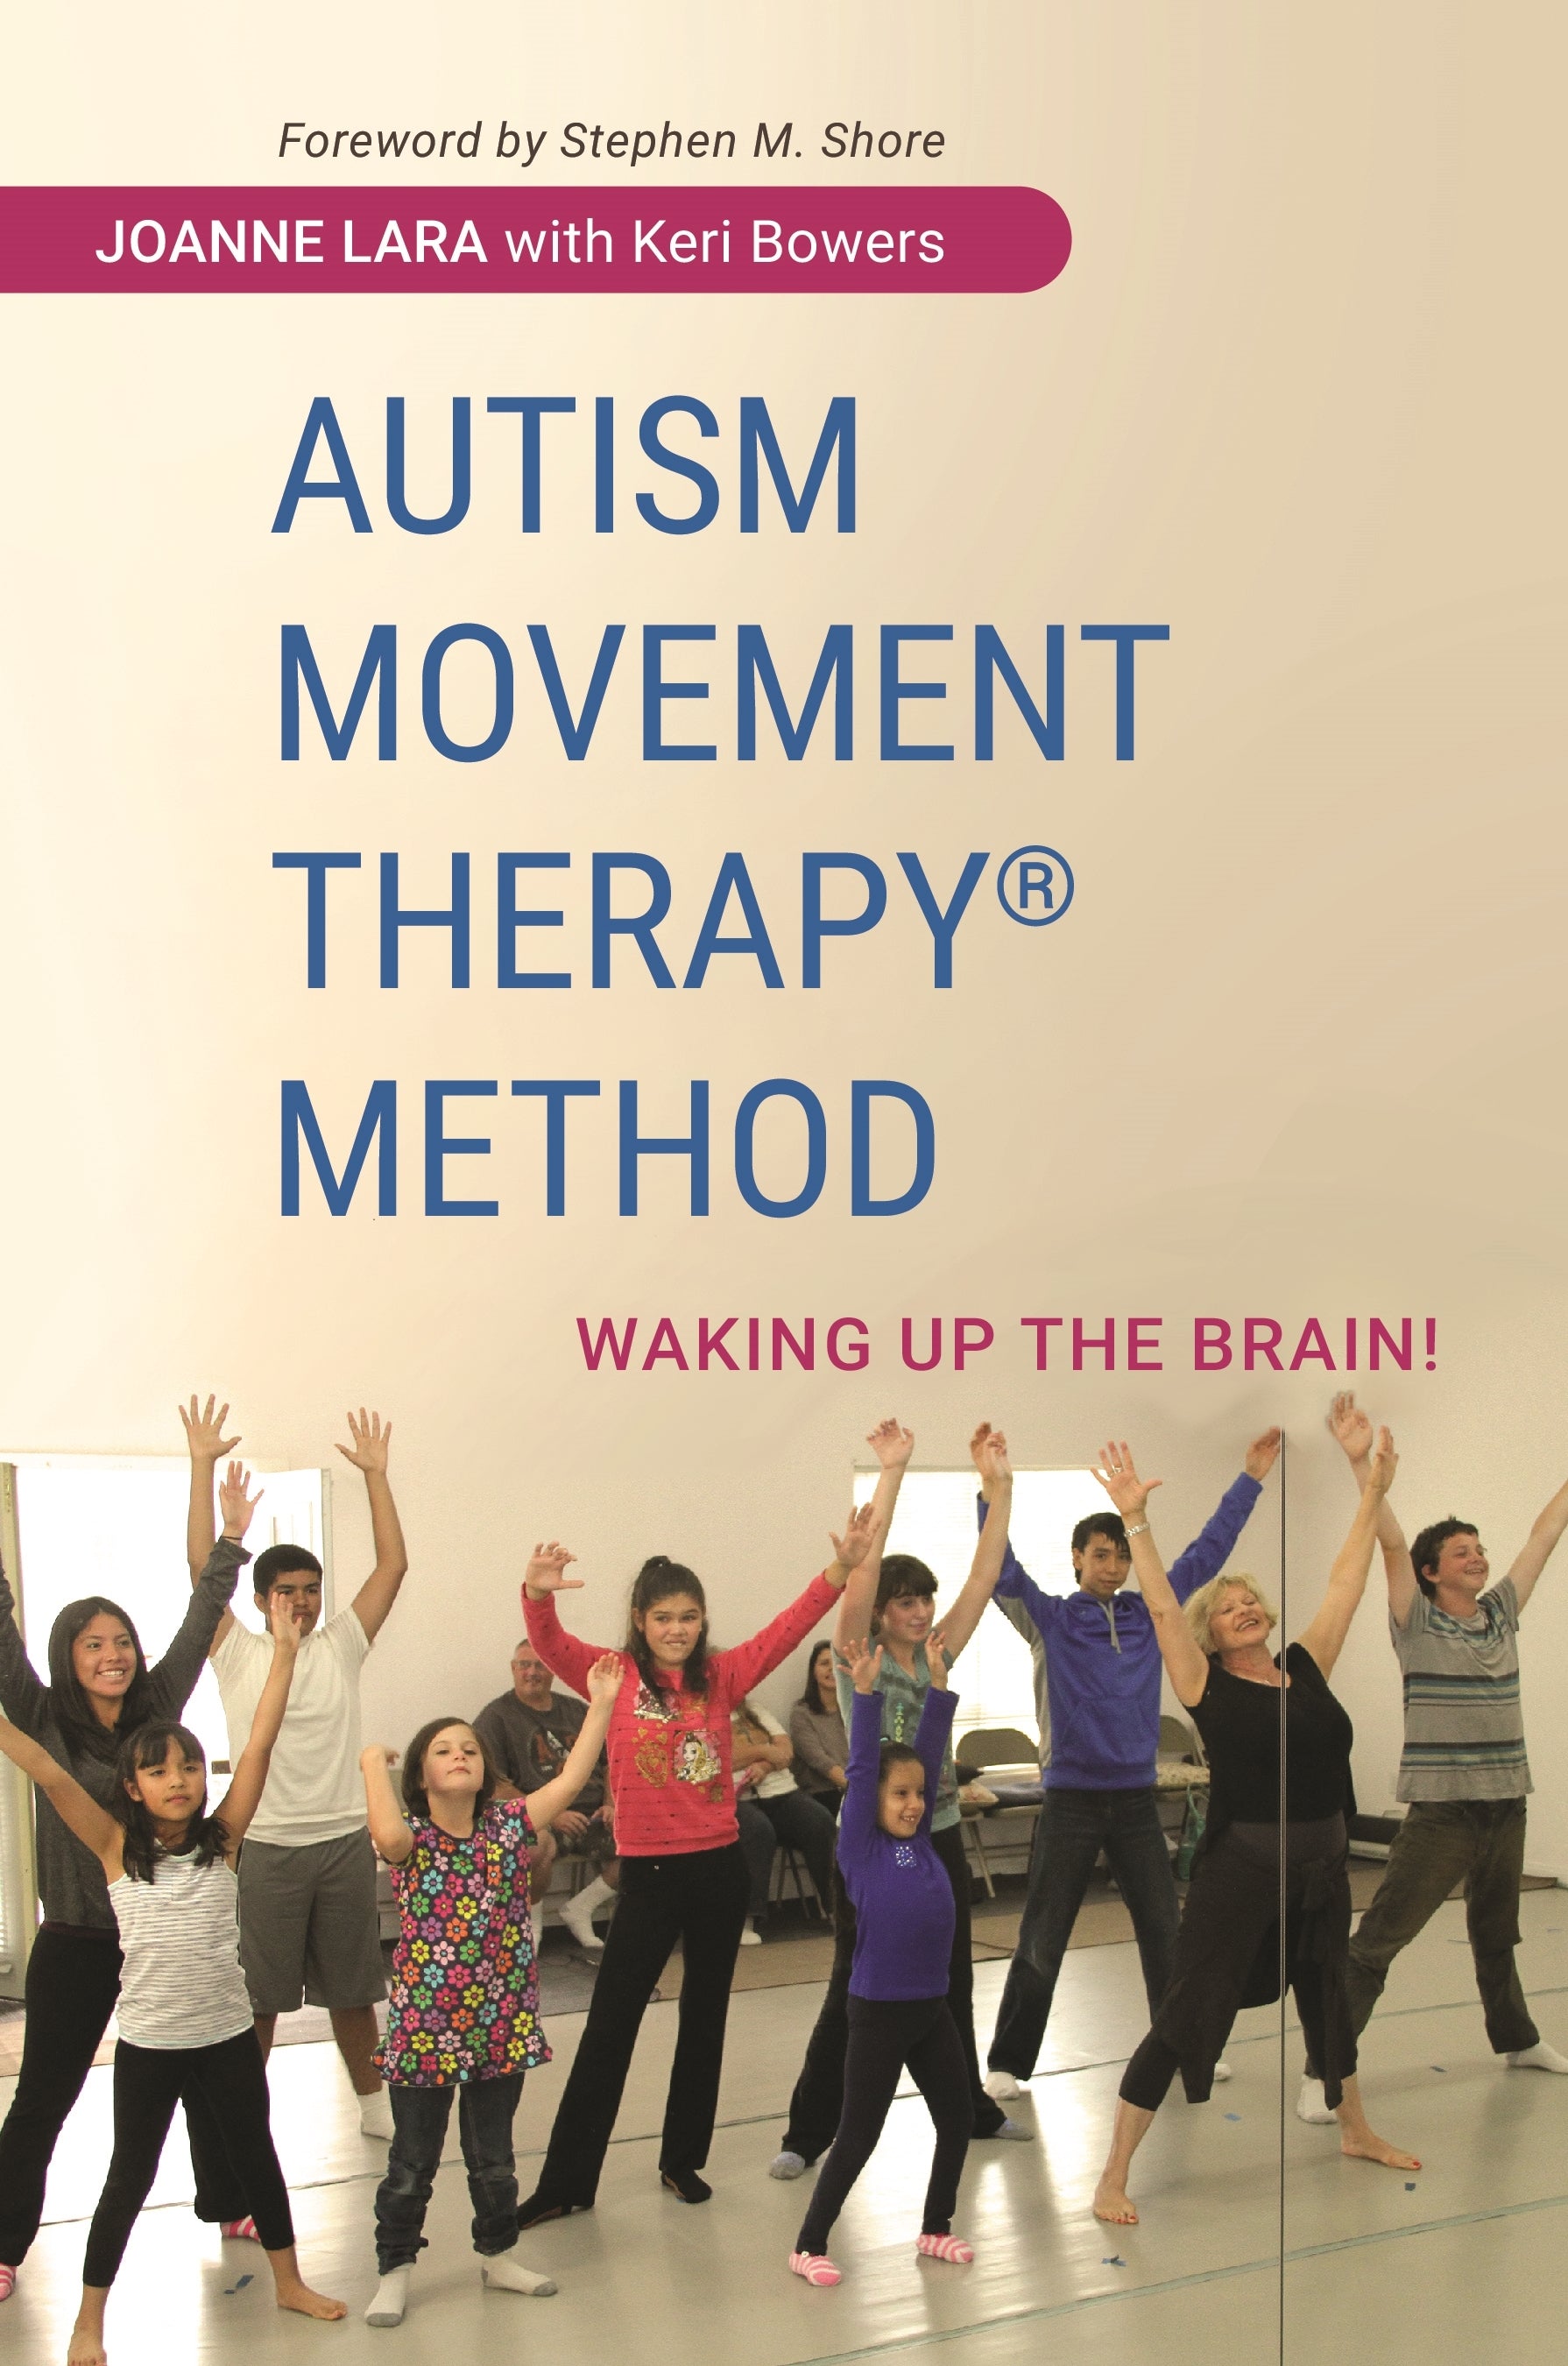 Autism Movement Therapy (R) Method by Stephen M. Shore, Joanne Lara